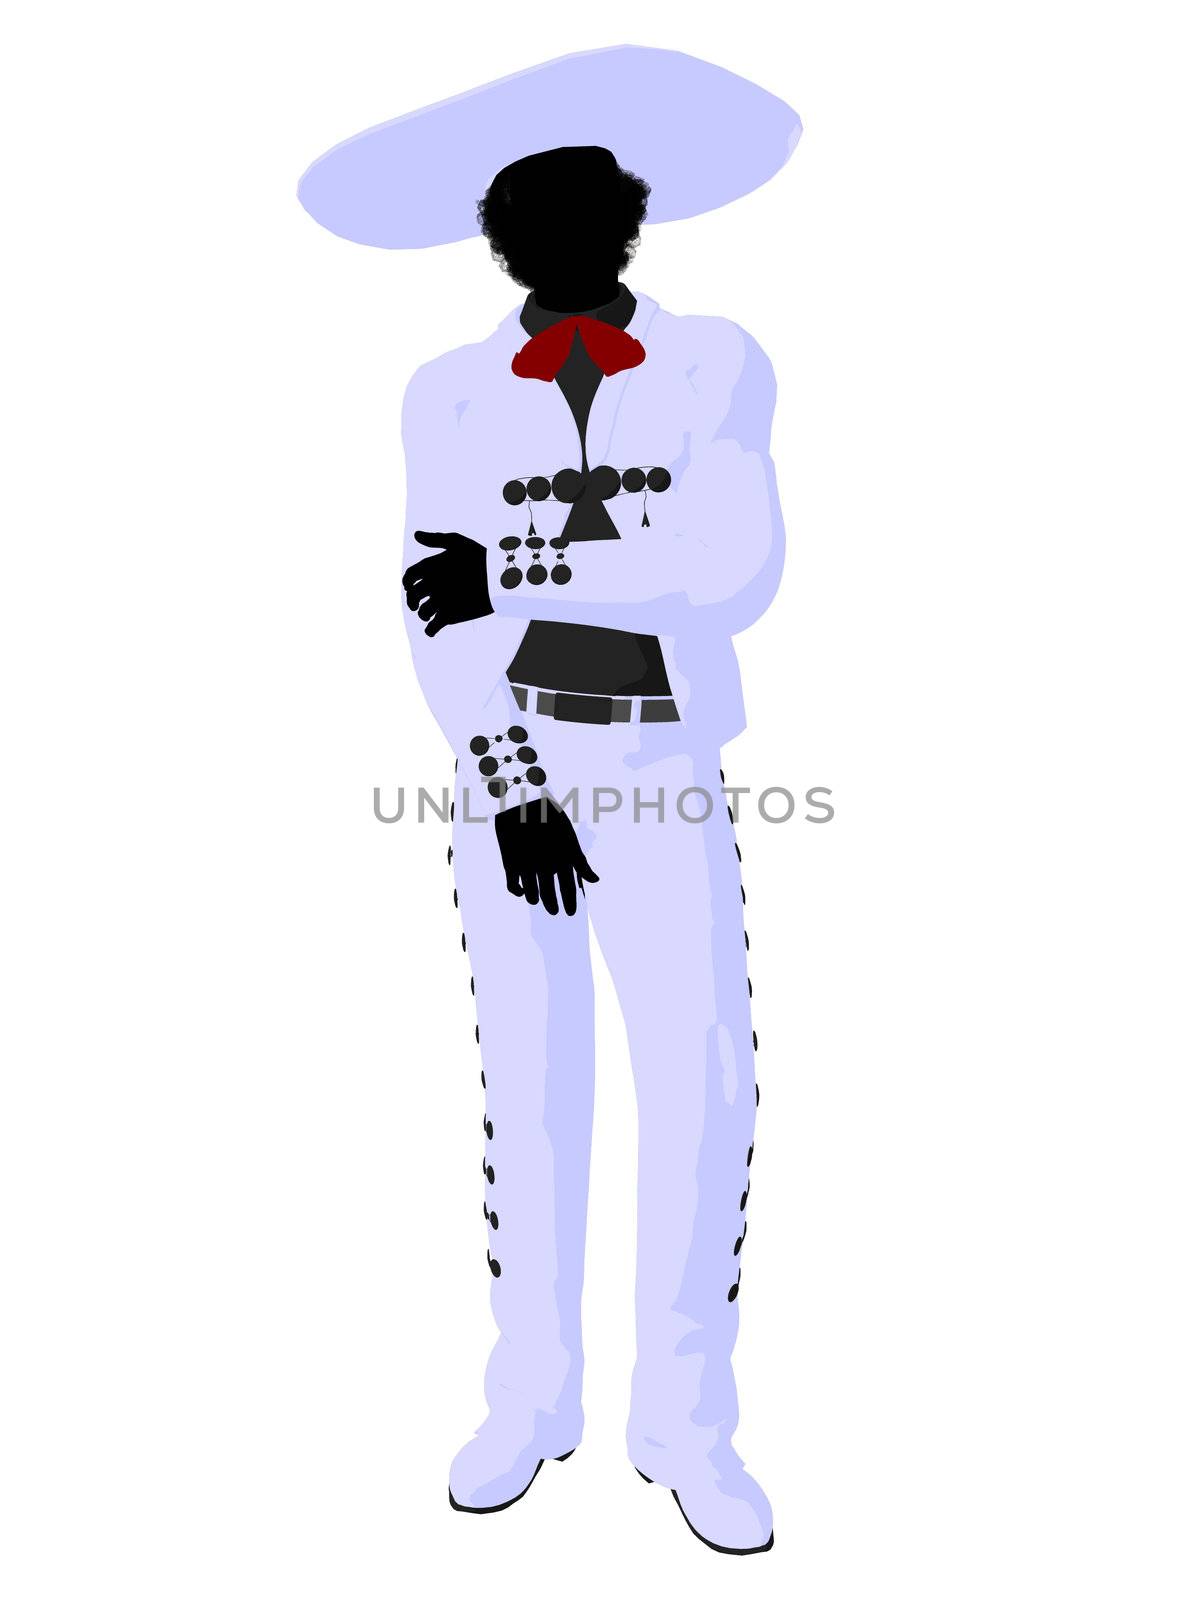 African American Mariachi Silhouette Illustration by kathygold